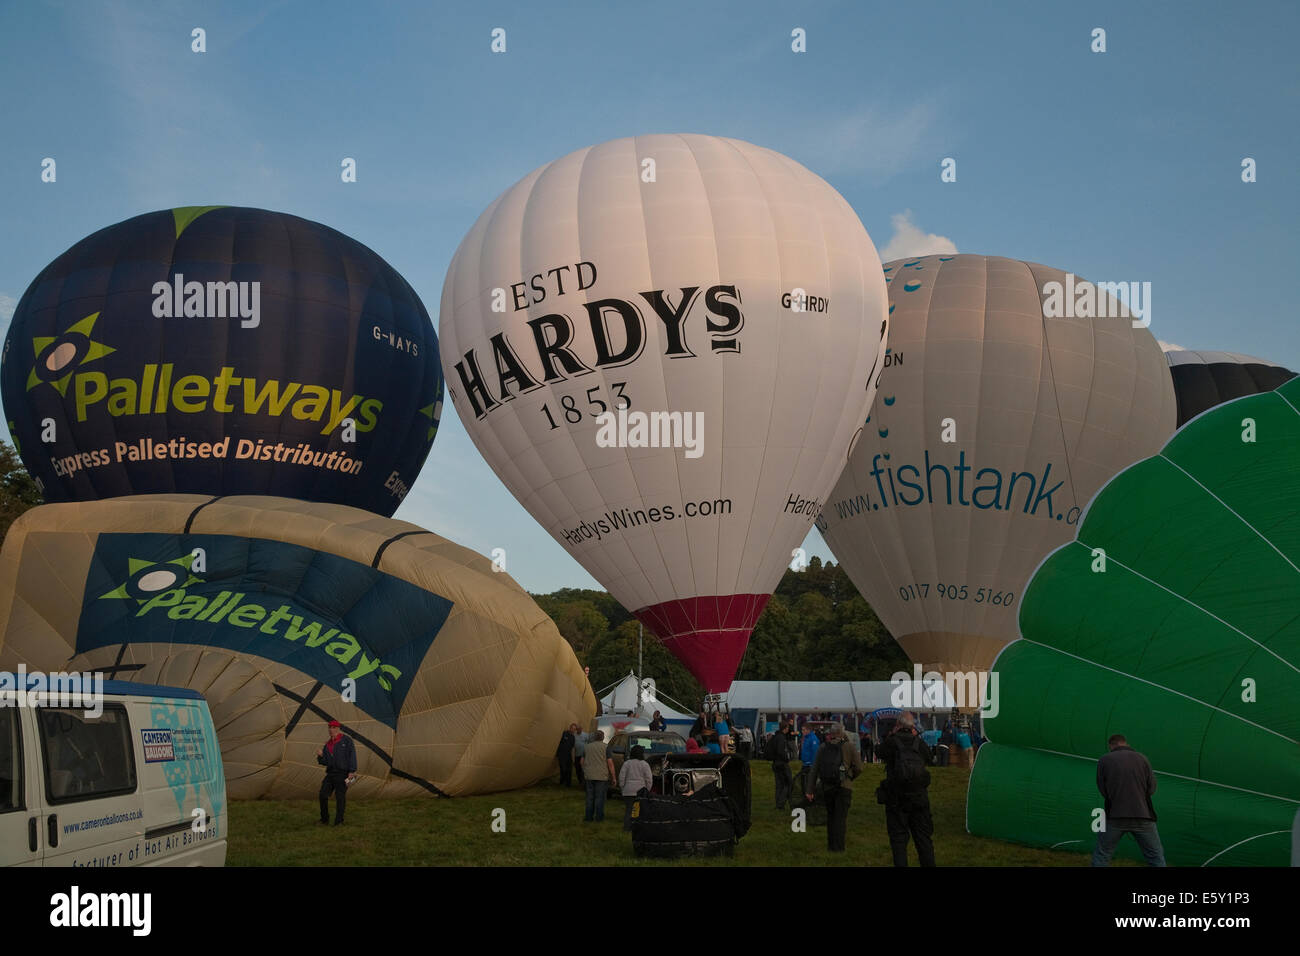 Bristol, UK. 8th August, 2014. Balloon inflation at the early morning launch during the Bristol International Balloon Fiesta Credit: Keith Larby/Alamy Live News Stock Photo